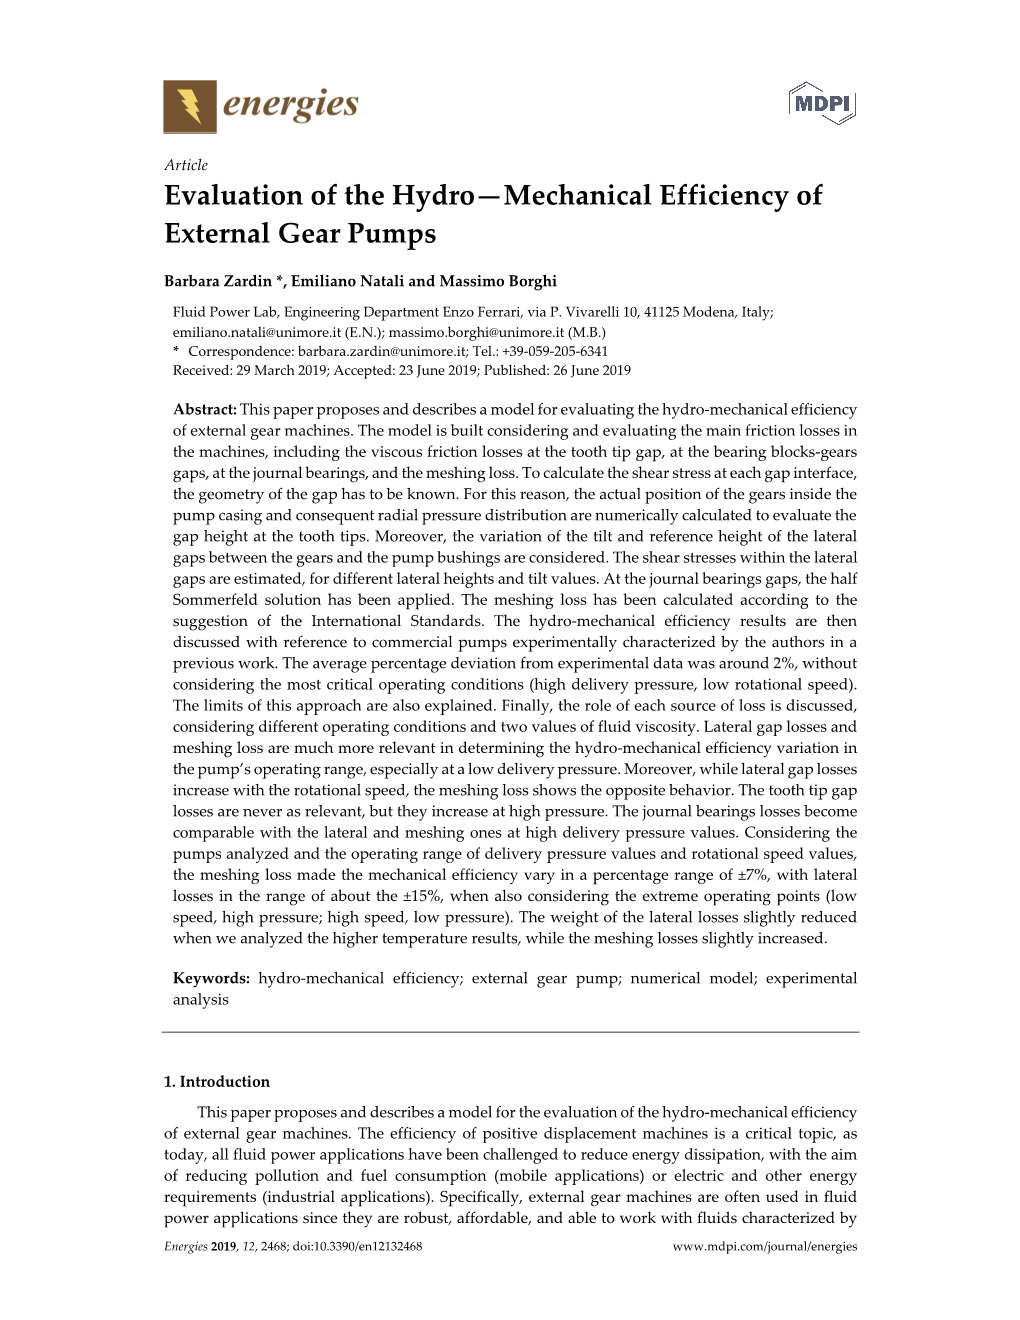 Evaluation of the Hydro—Mechanical Efficiency of External Gear Pumps